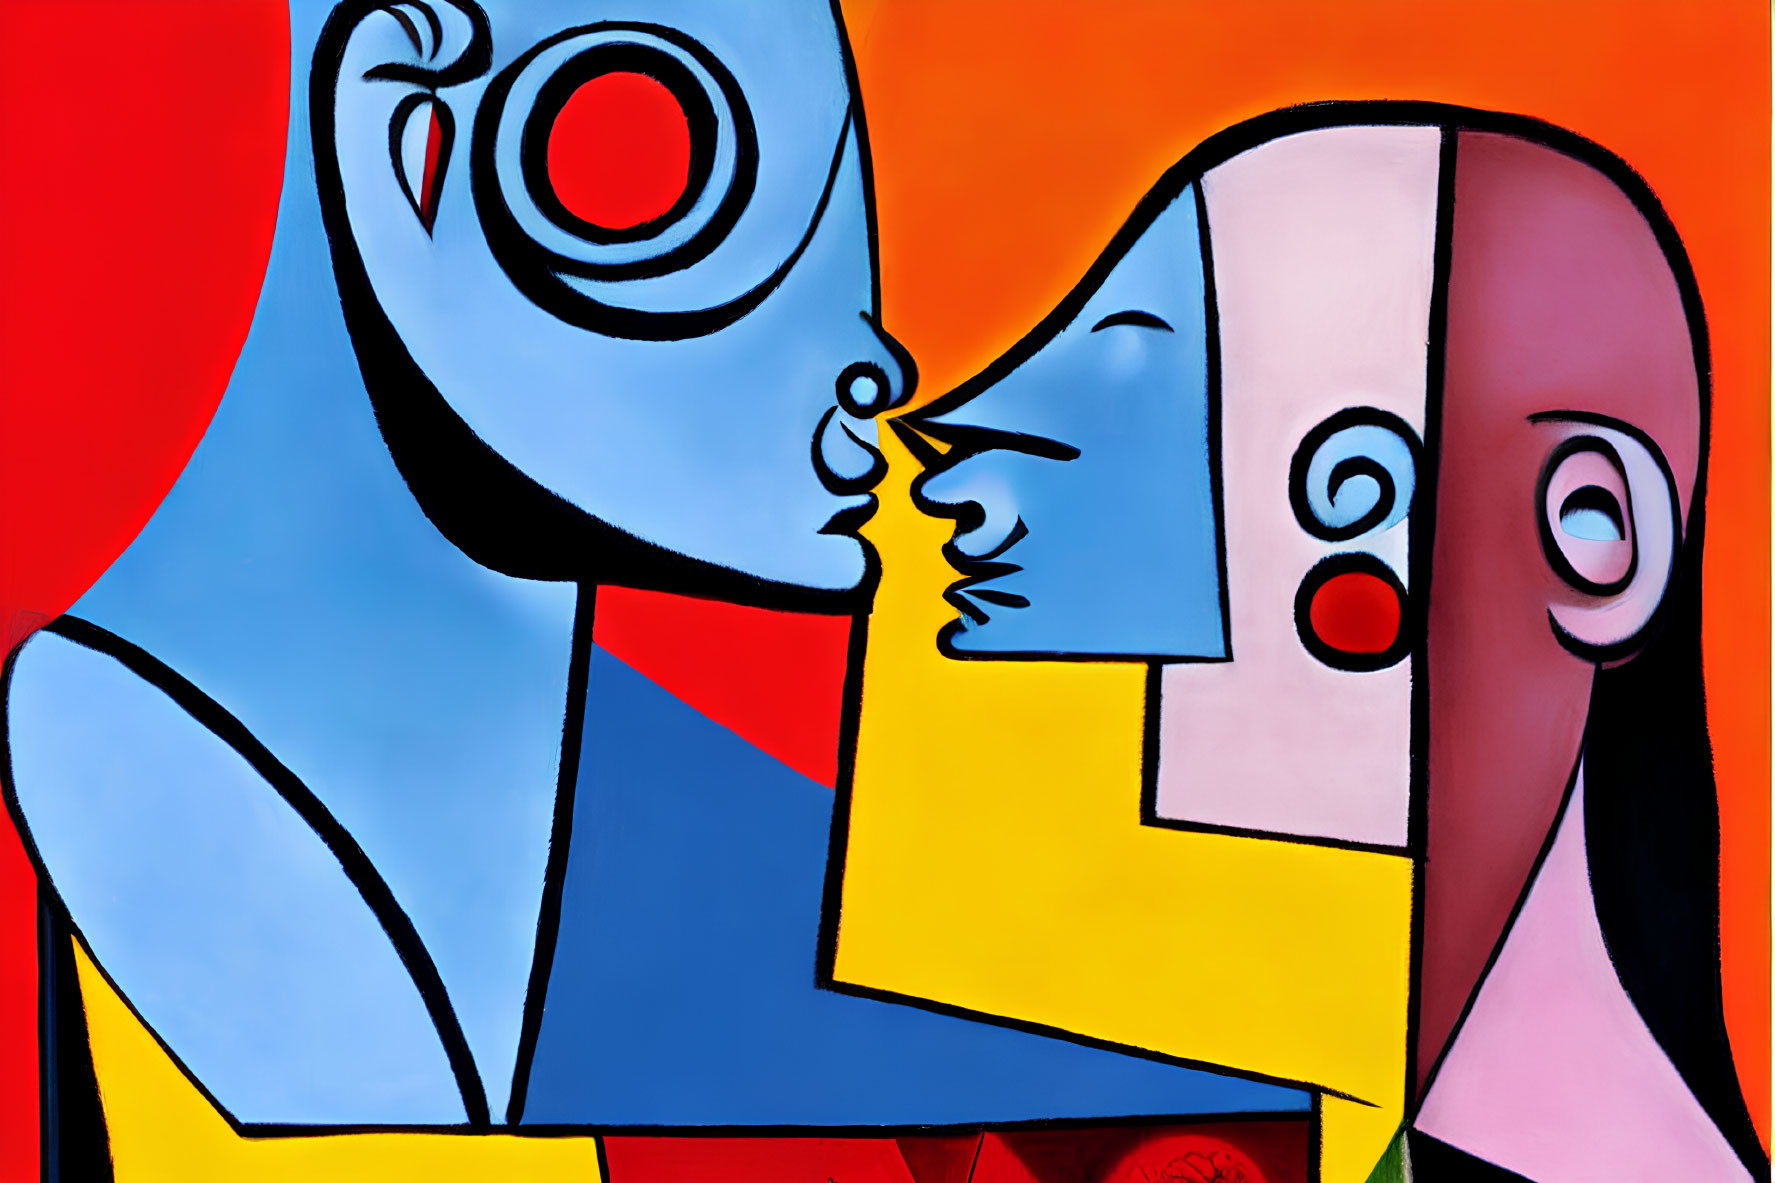 Colorful Abstract Painting: Two Profile Faces in Bold Colors and Geometric Shapes